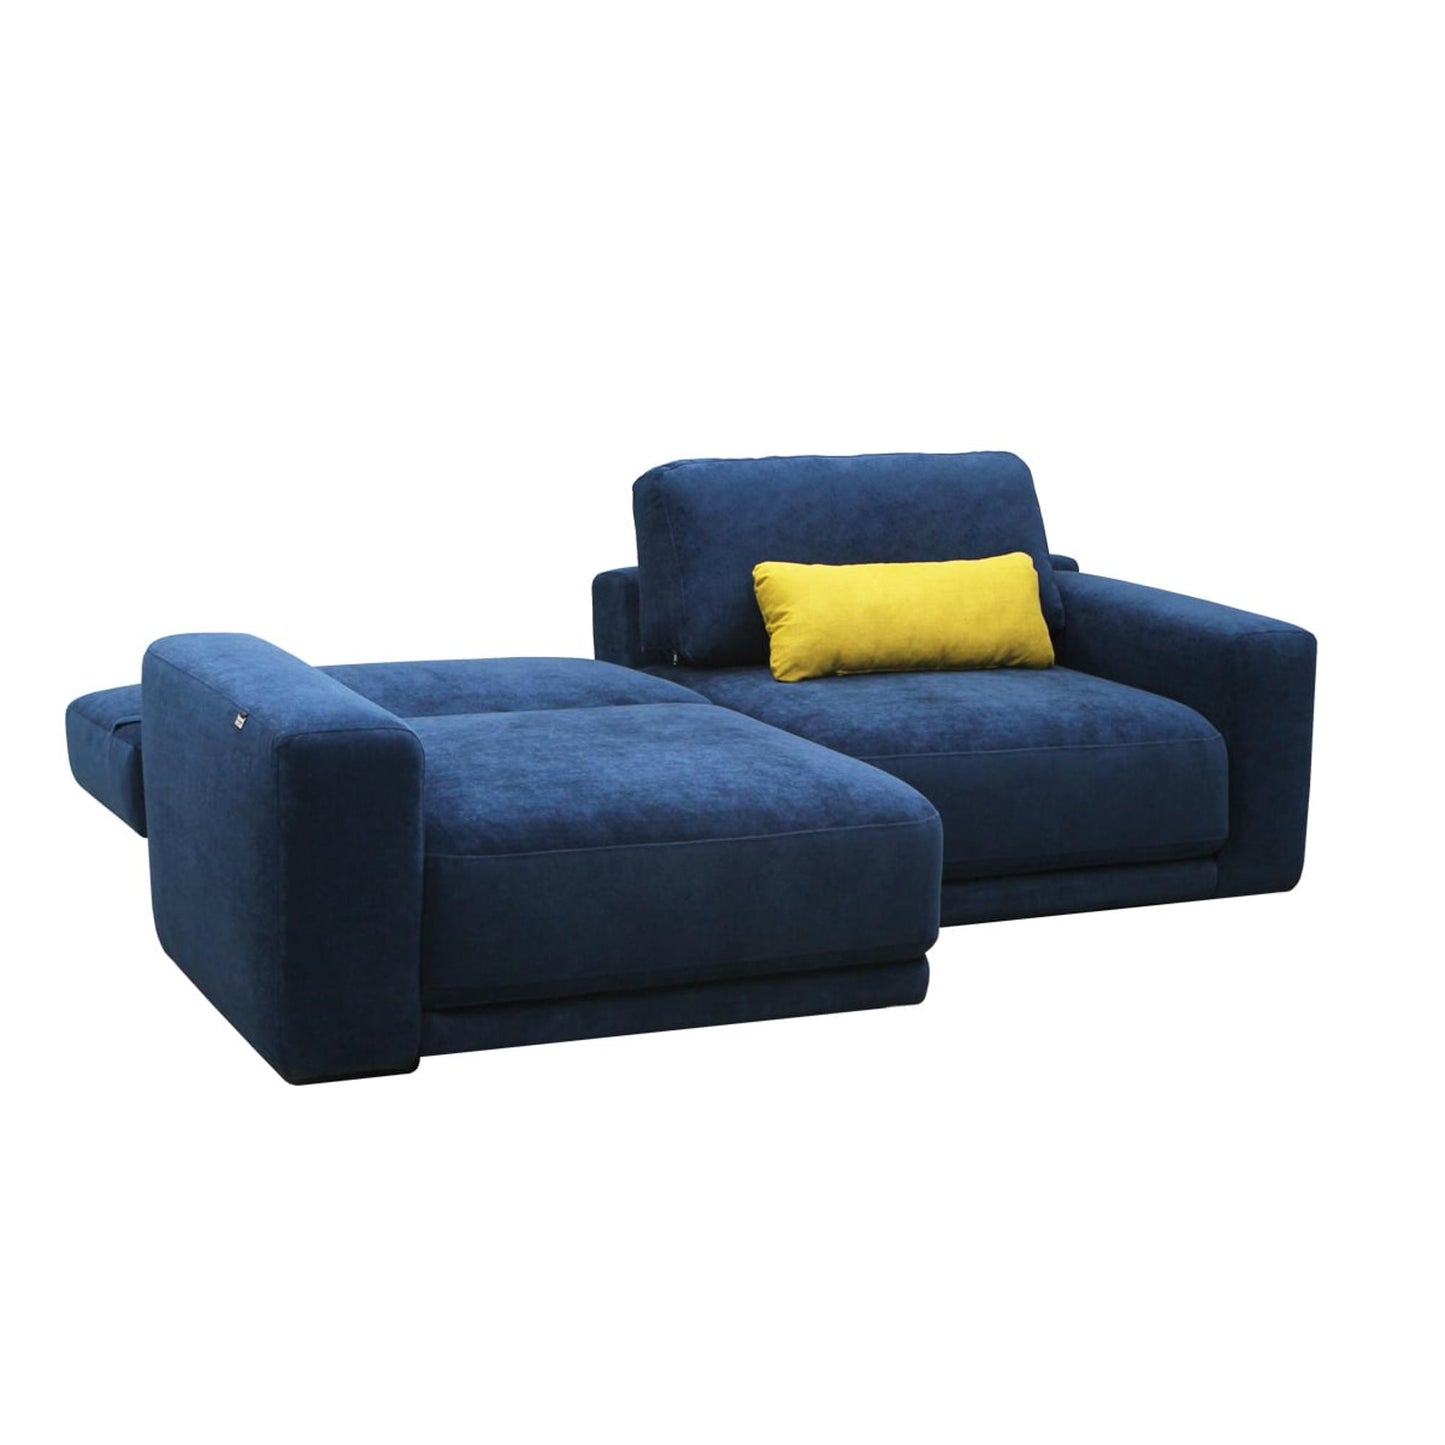 Robson Sofa Bed in Blue